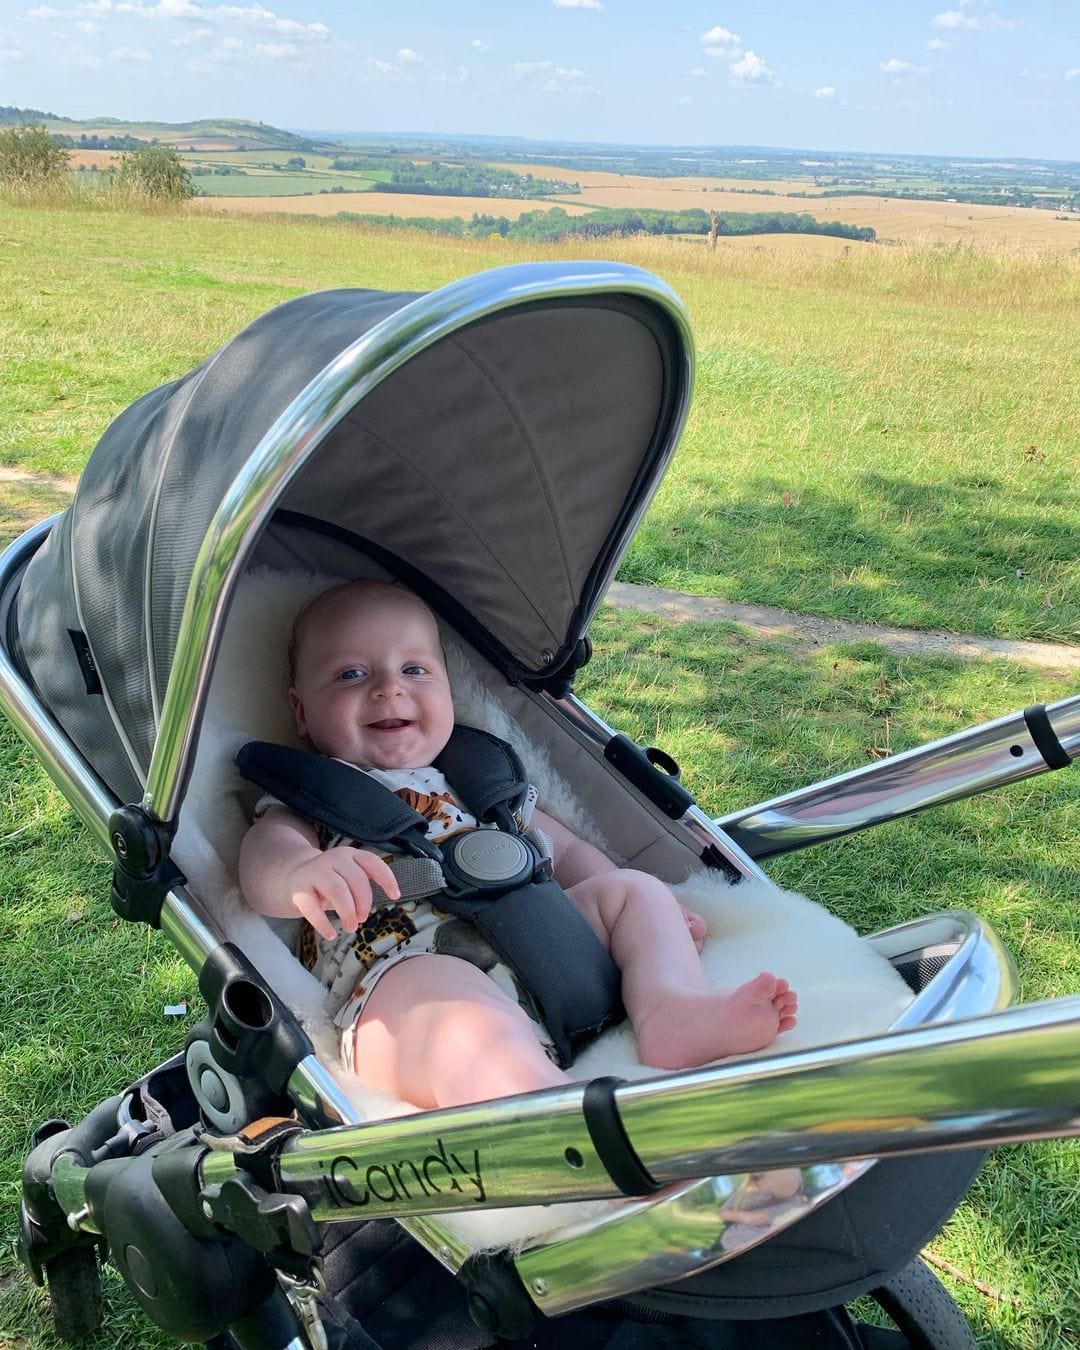 A smiling baby on a pram liner in an icandy peach pram in a field